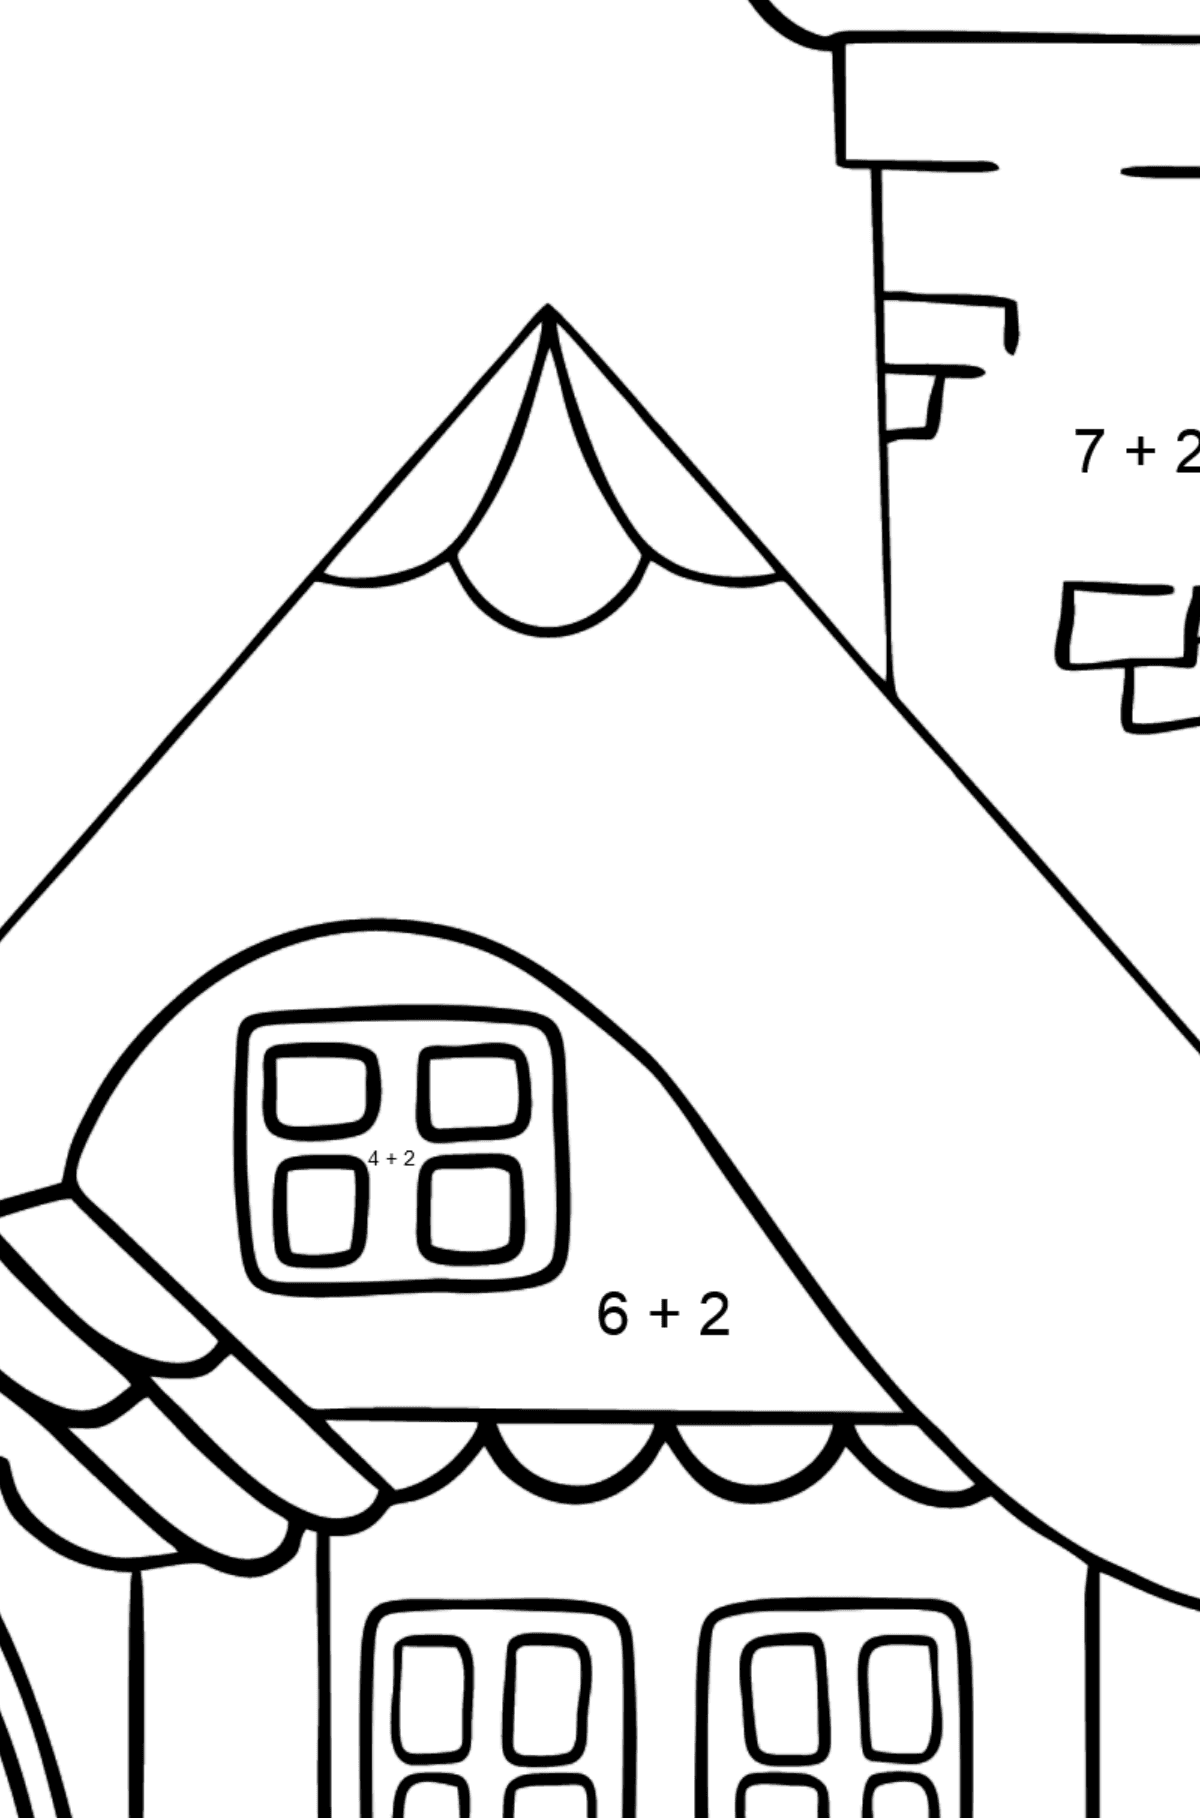 Simple Coloring Page - A Wonderful House - Math Coloring - Addition for Kids